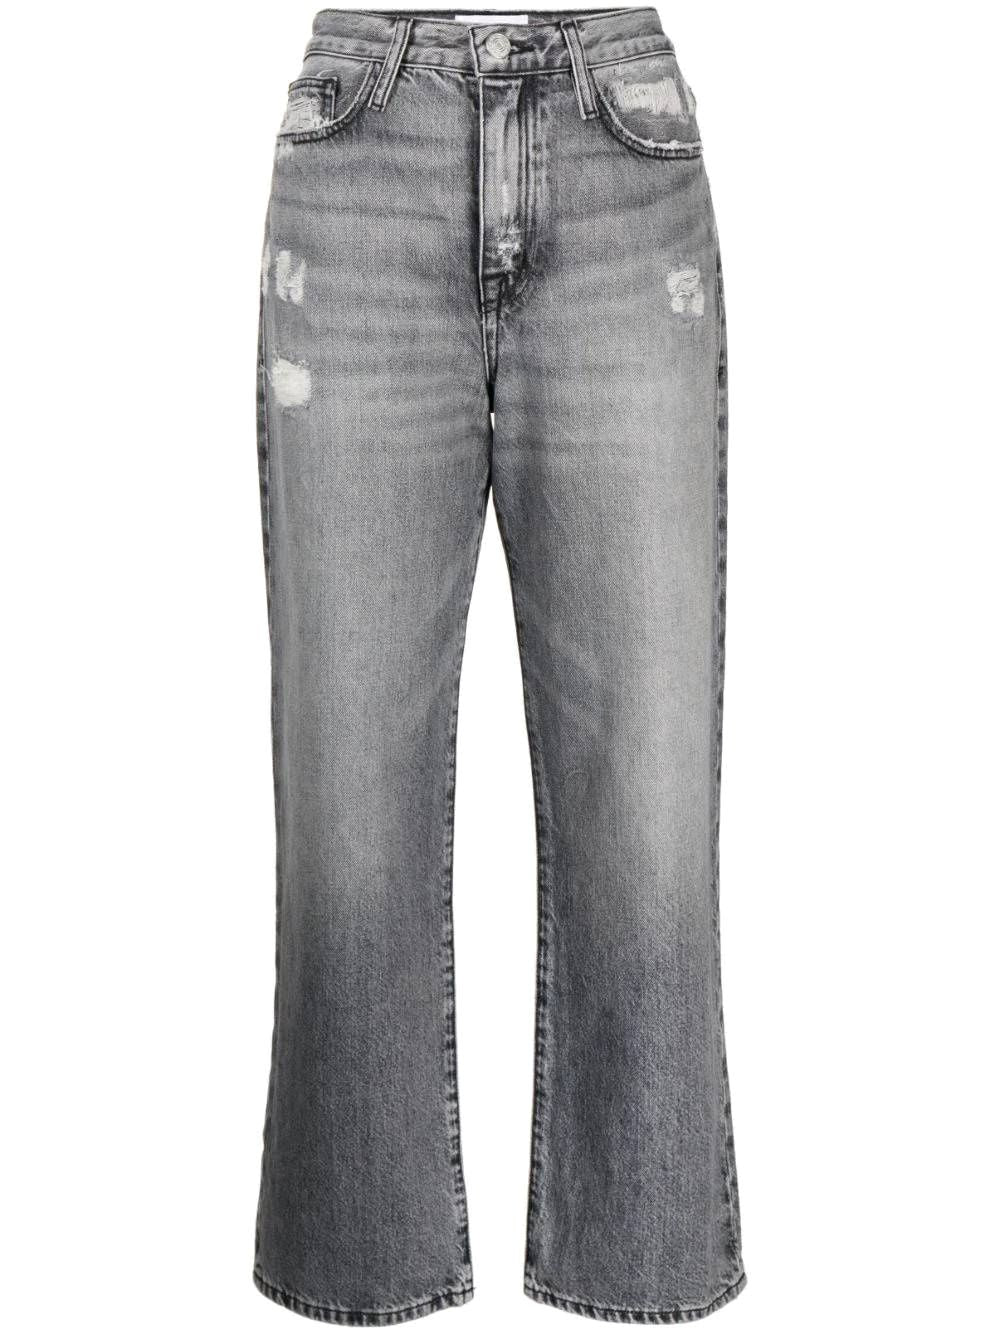 The Jane cropped jeans